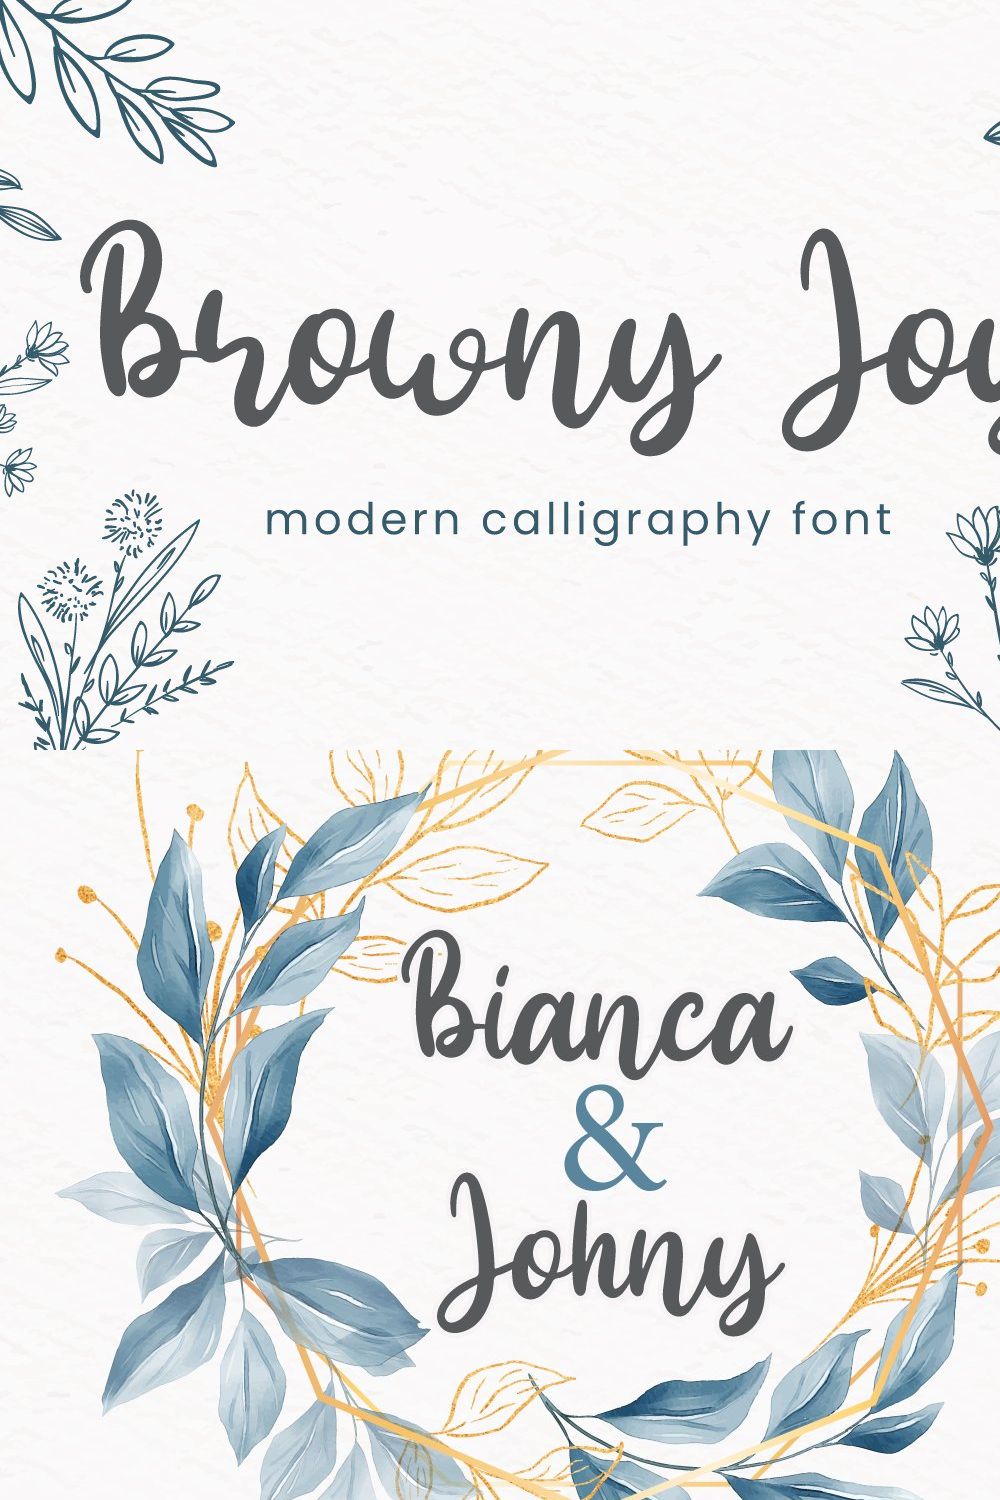 Browny Joy pinterest preview image.